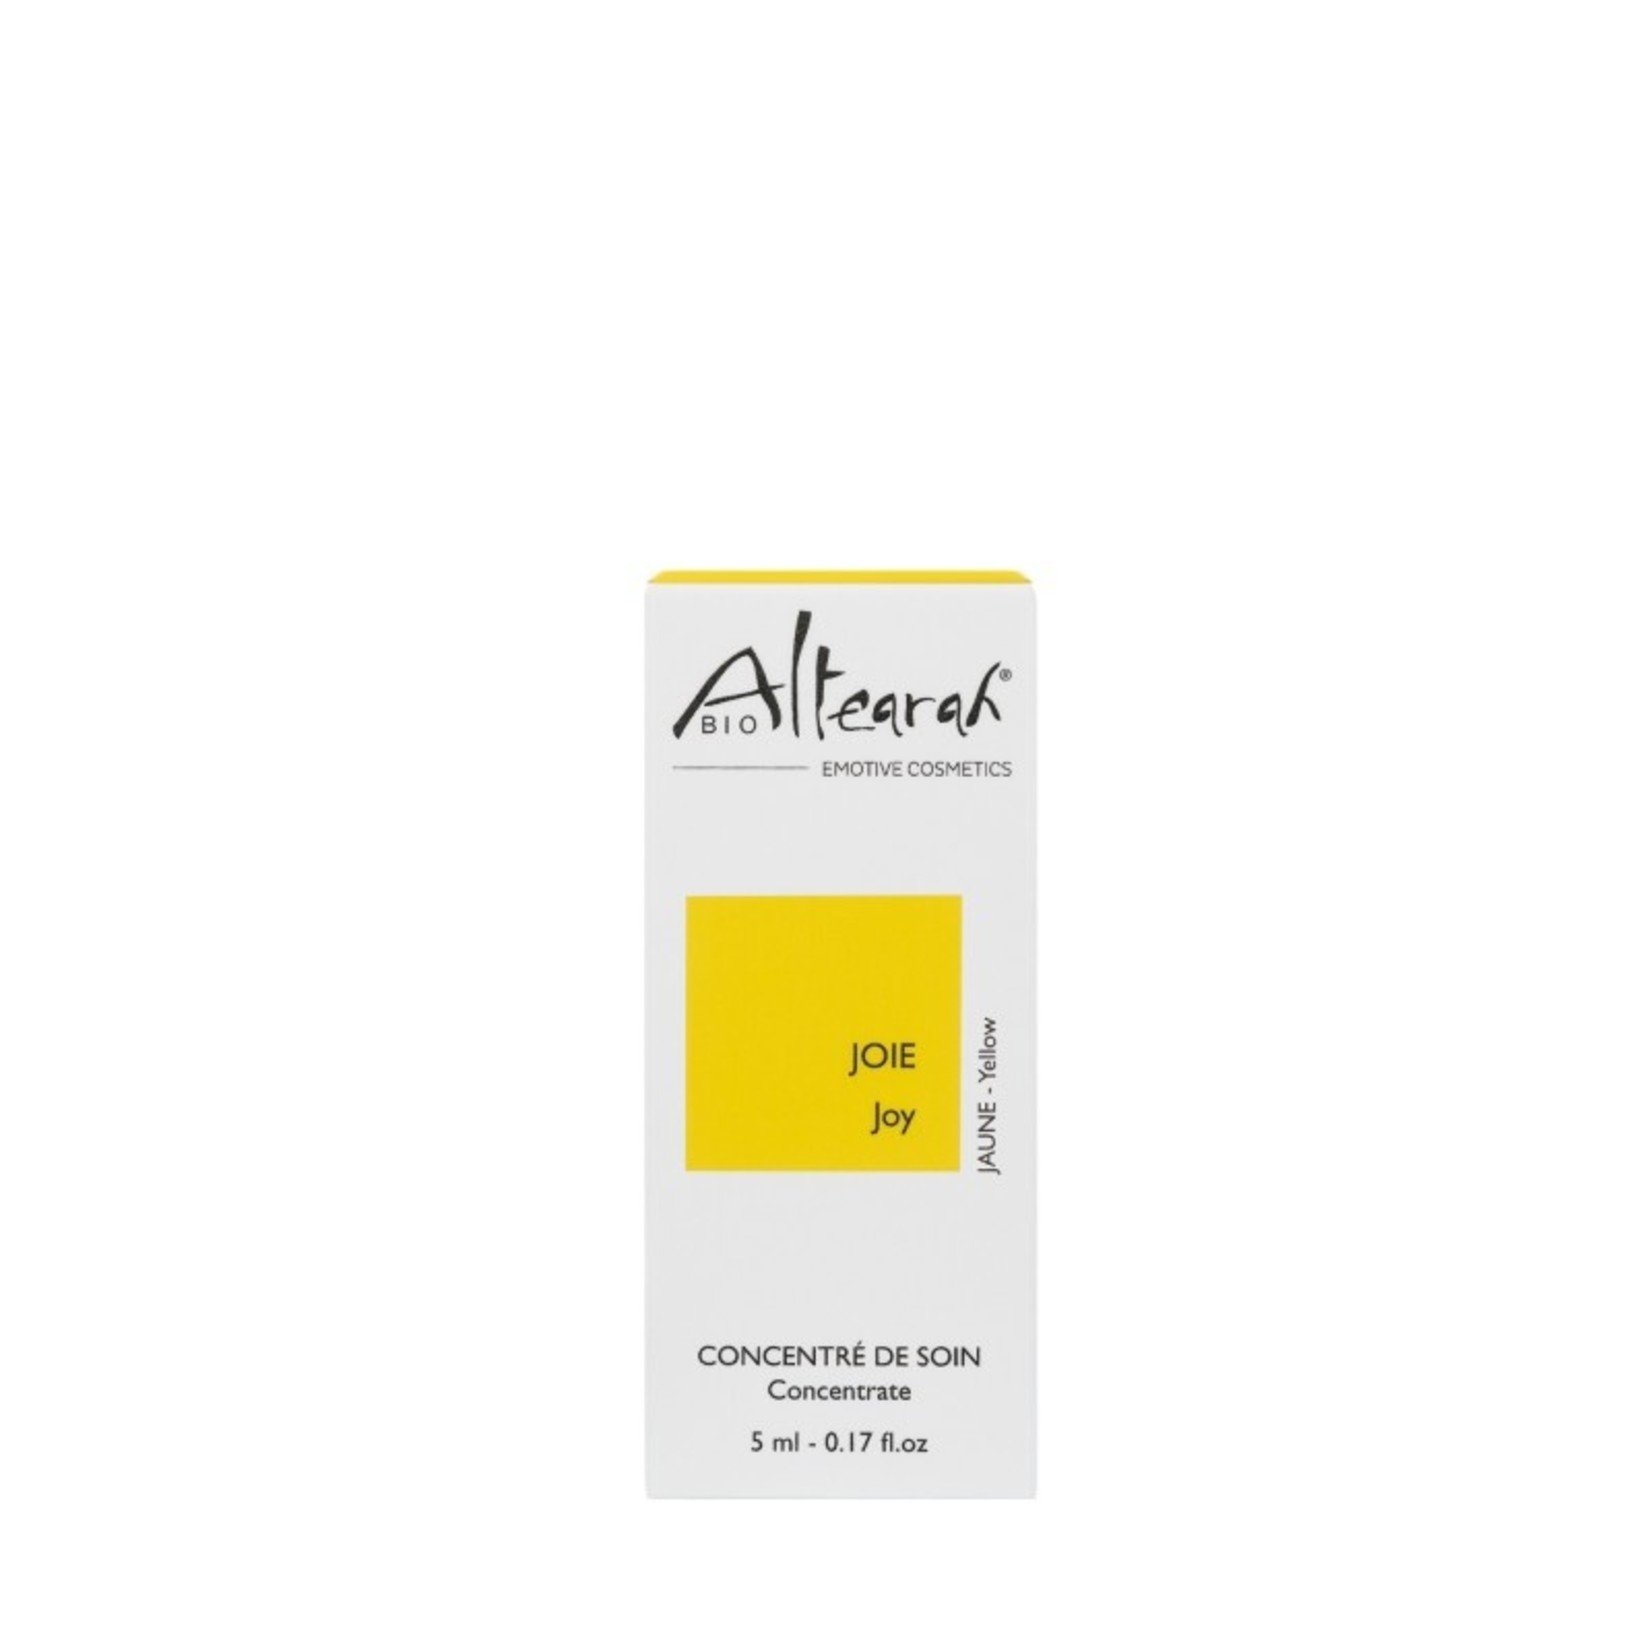 Altearah Concentrate - (Yellow) Joy